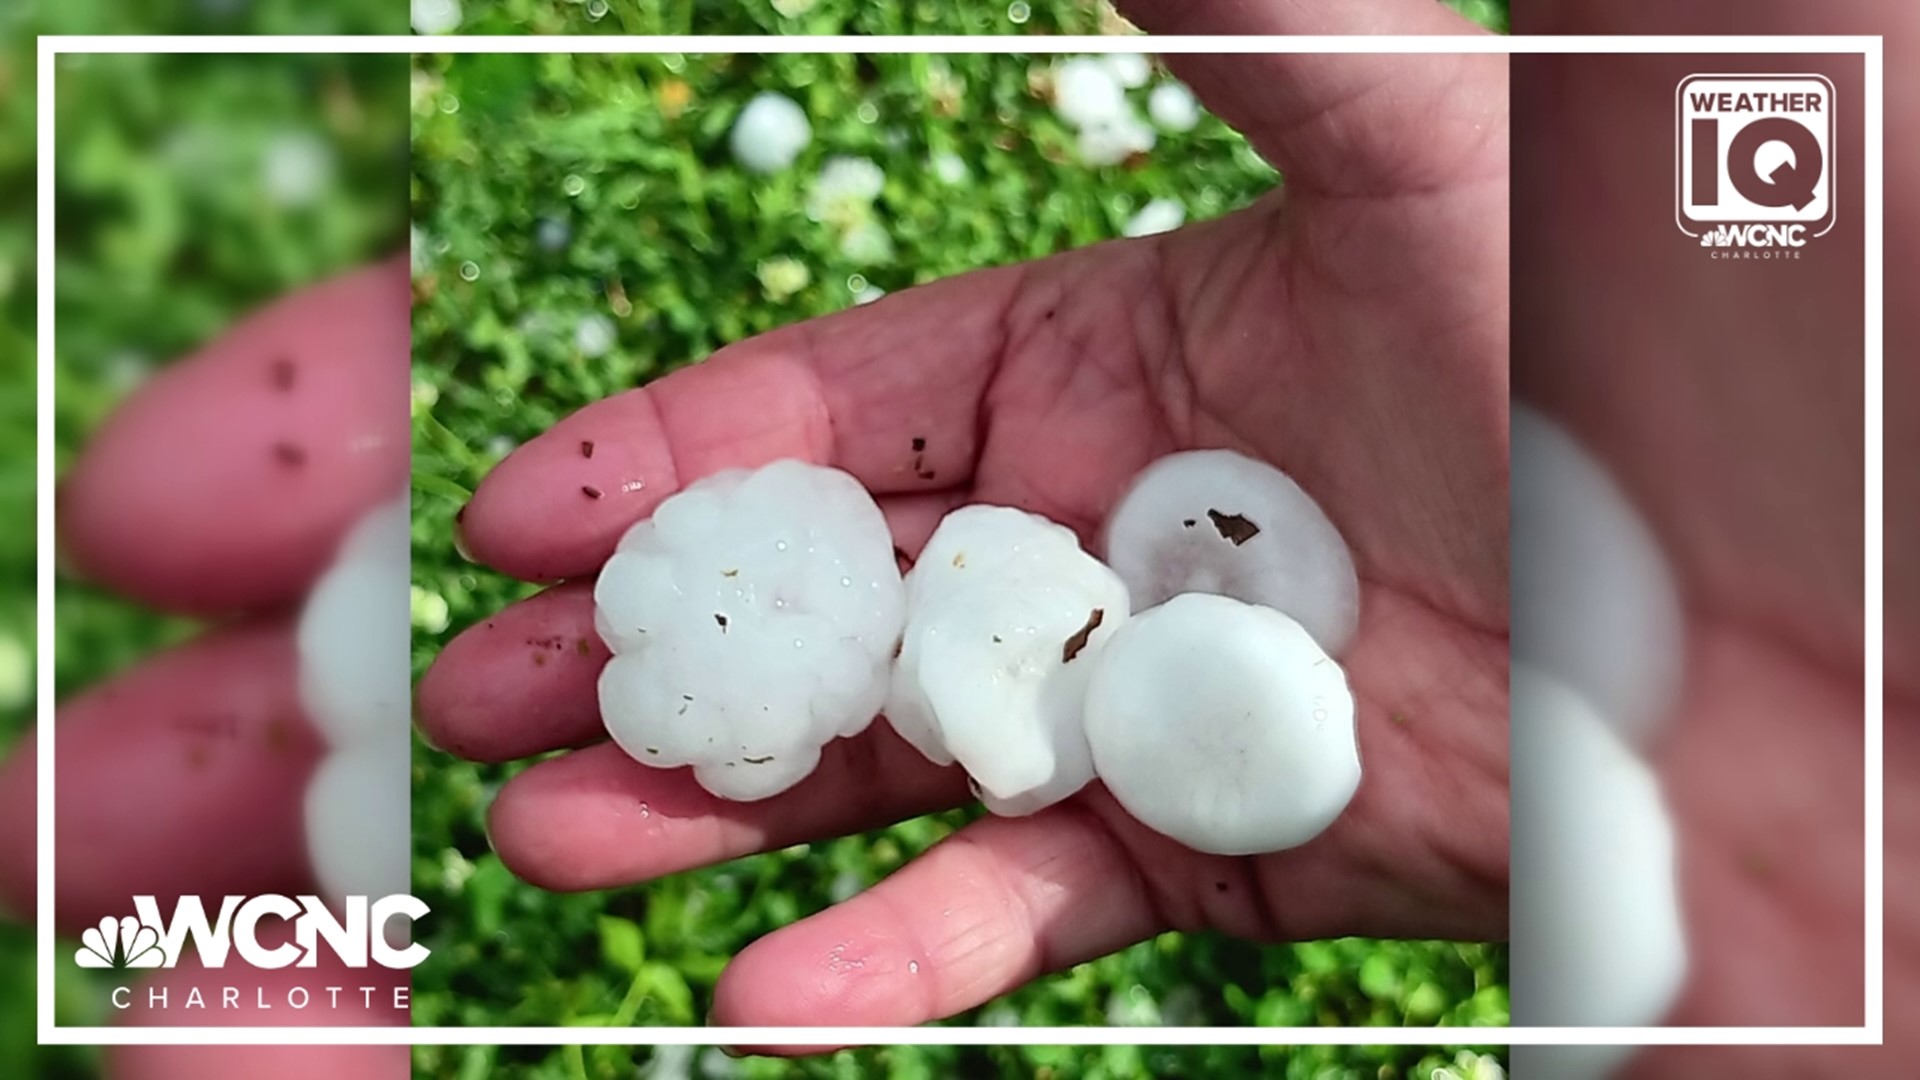 Meteorologist Chris Mulcahy explains how supercell thunderstorm produced hail over Rock Hill, South Carolina that was upward of two inches in diameter.